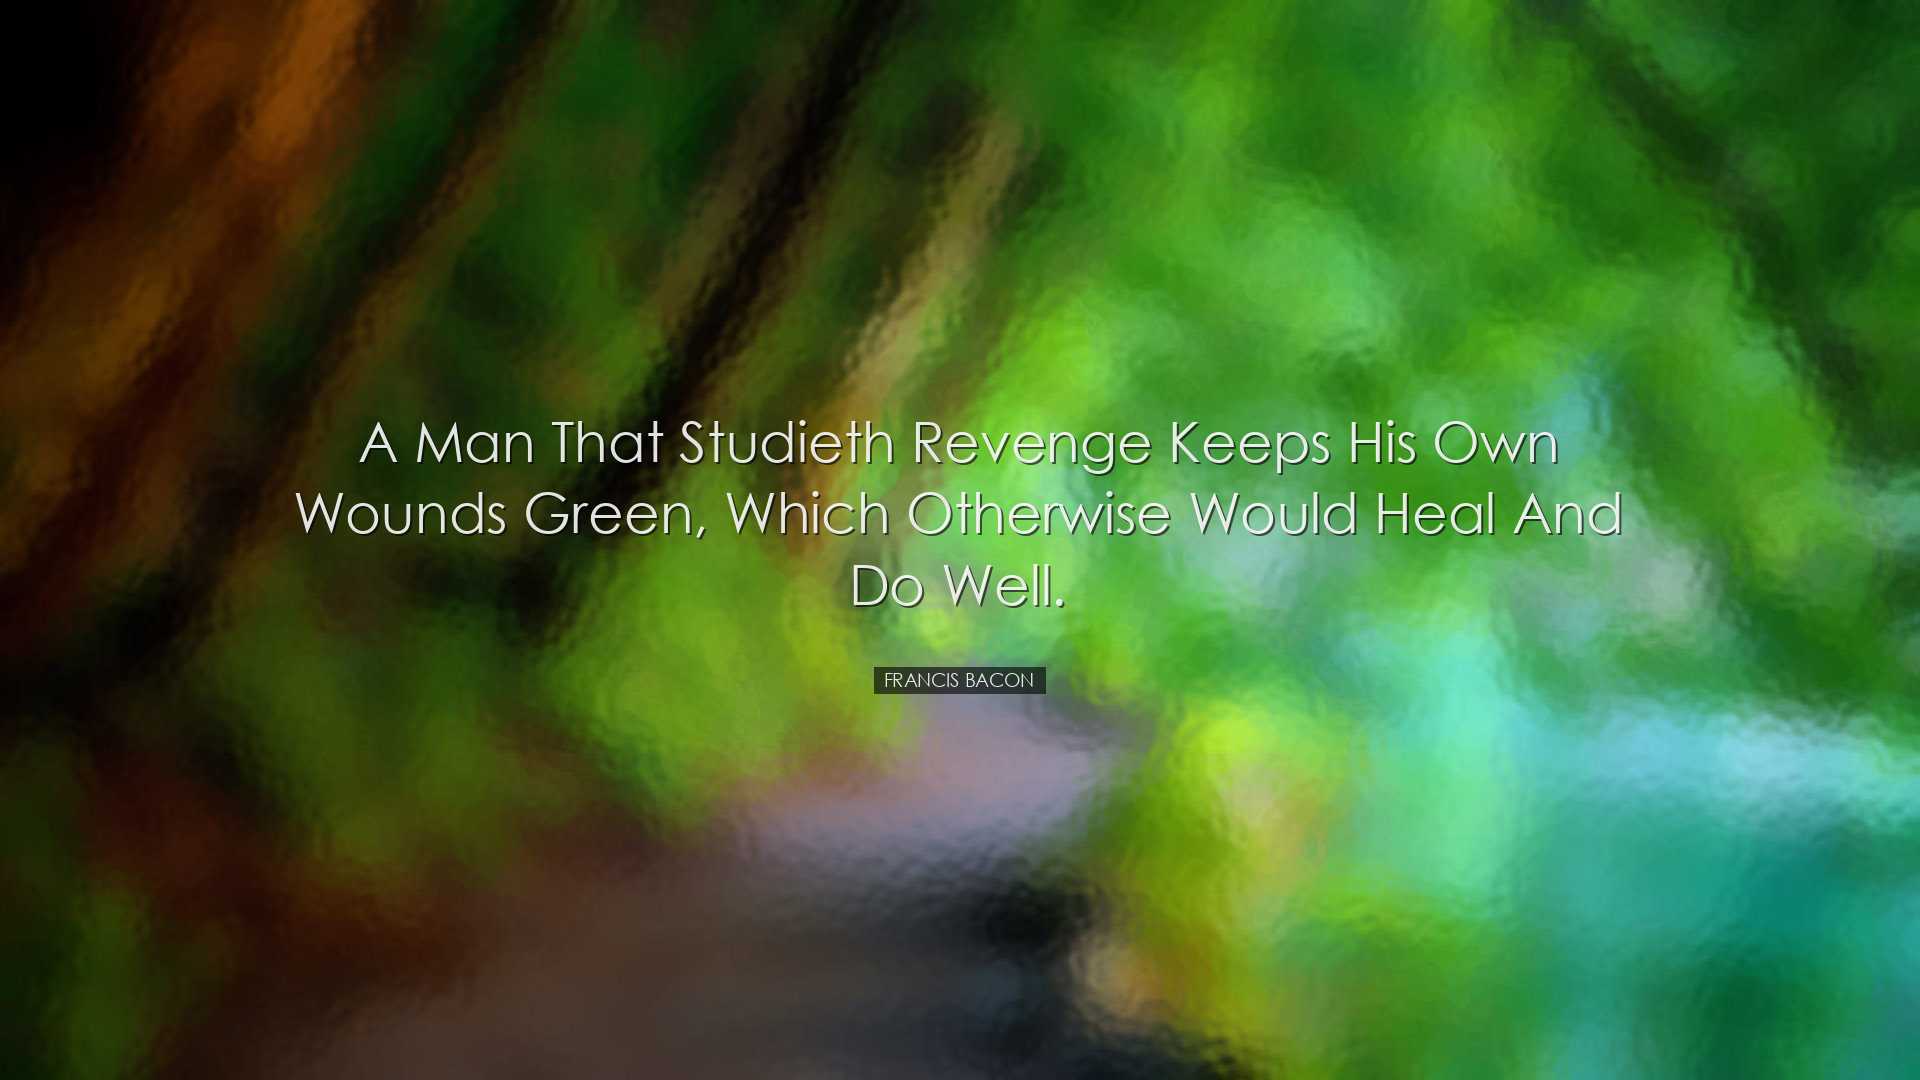 A man that studieth revenge keeps his own wounds green, which othe